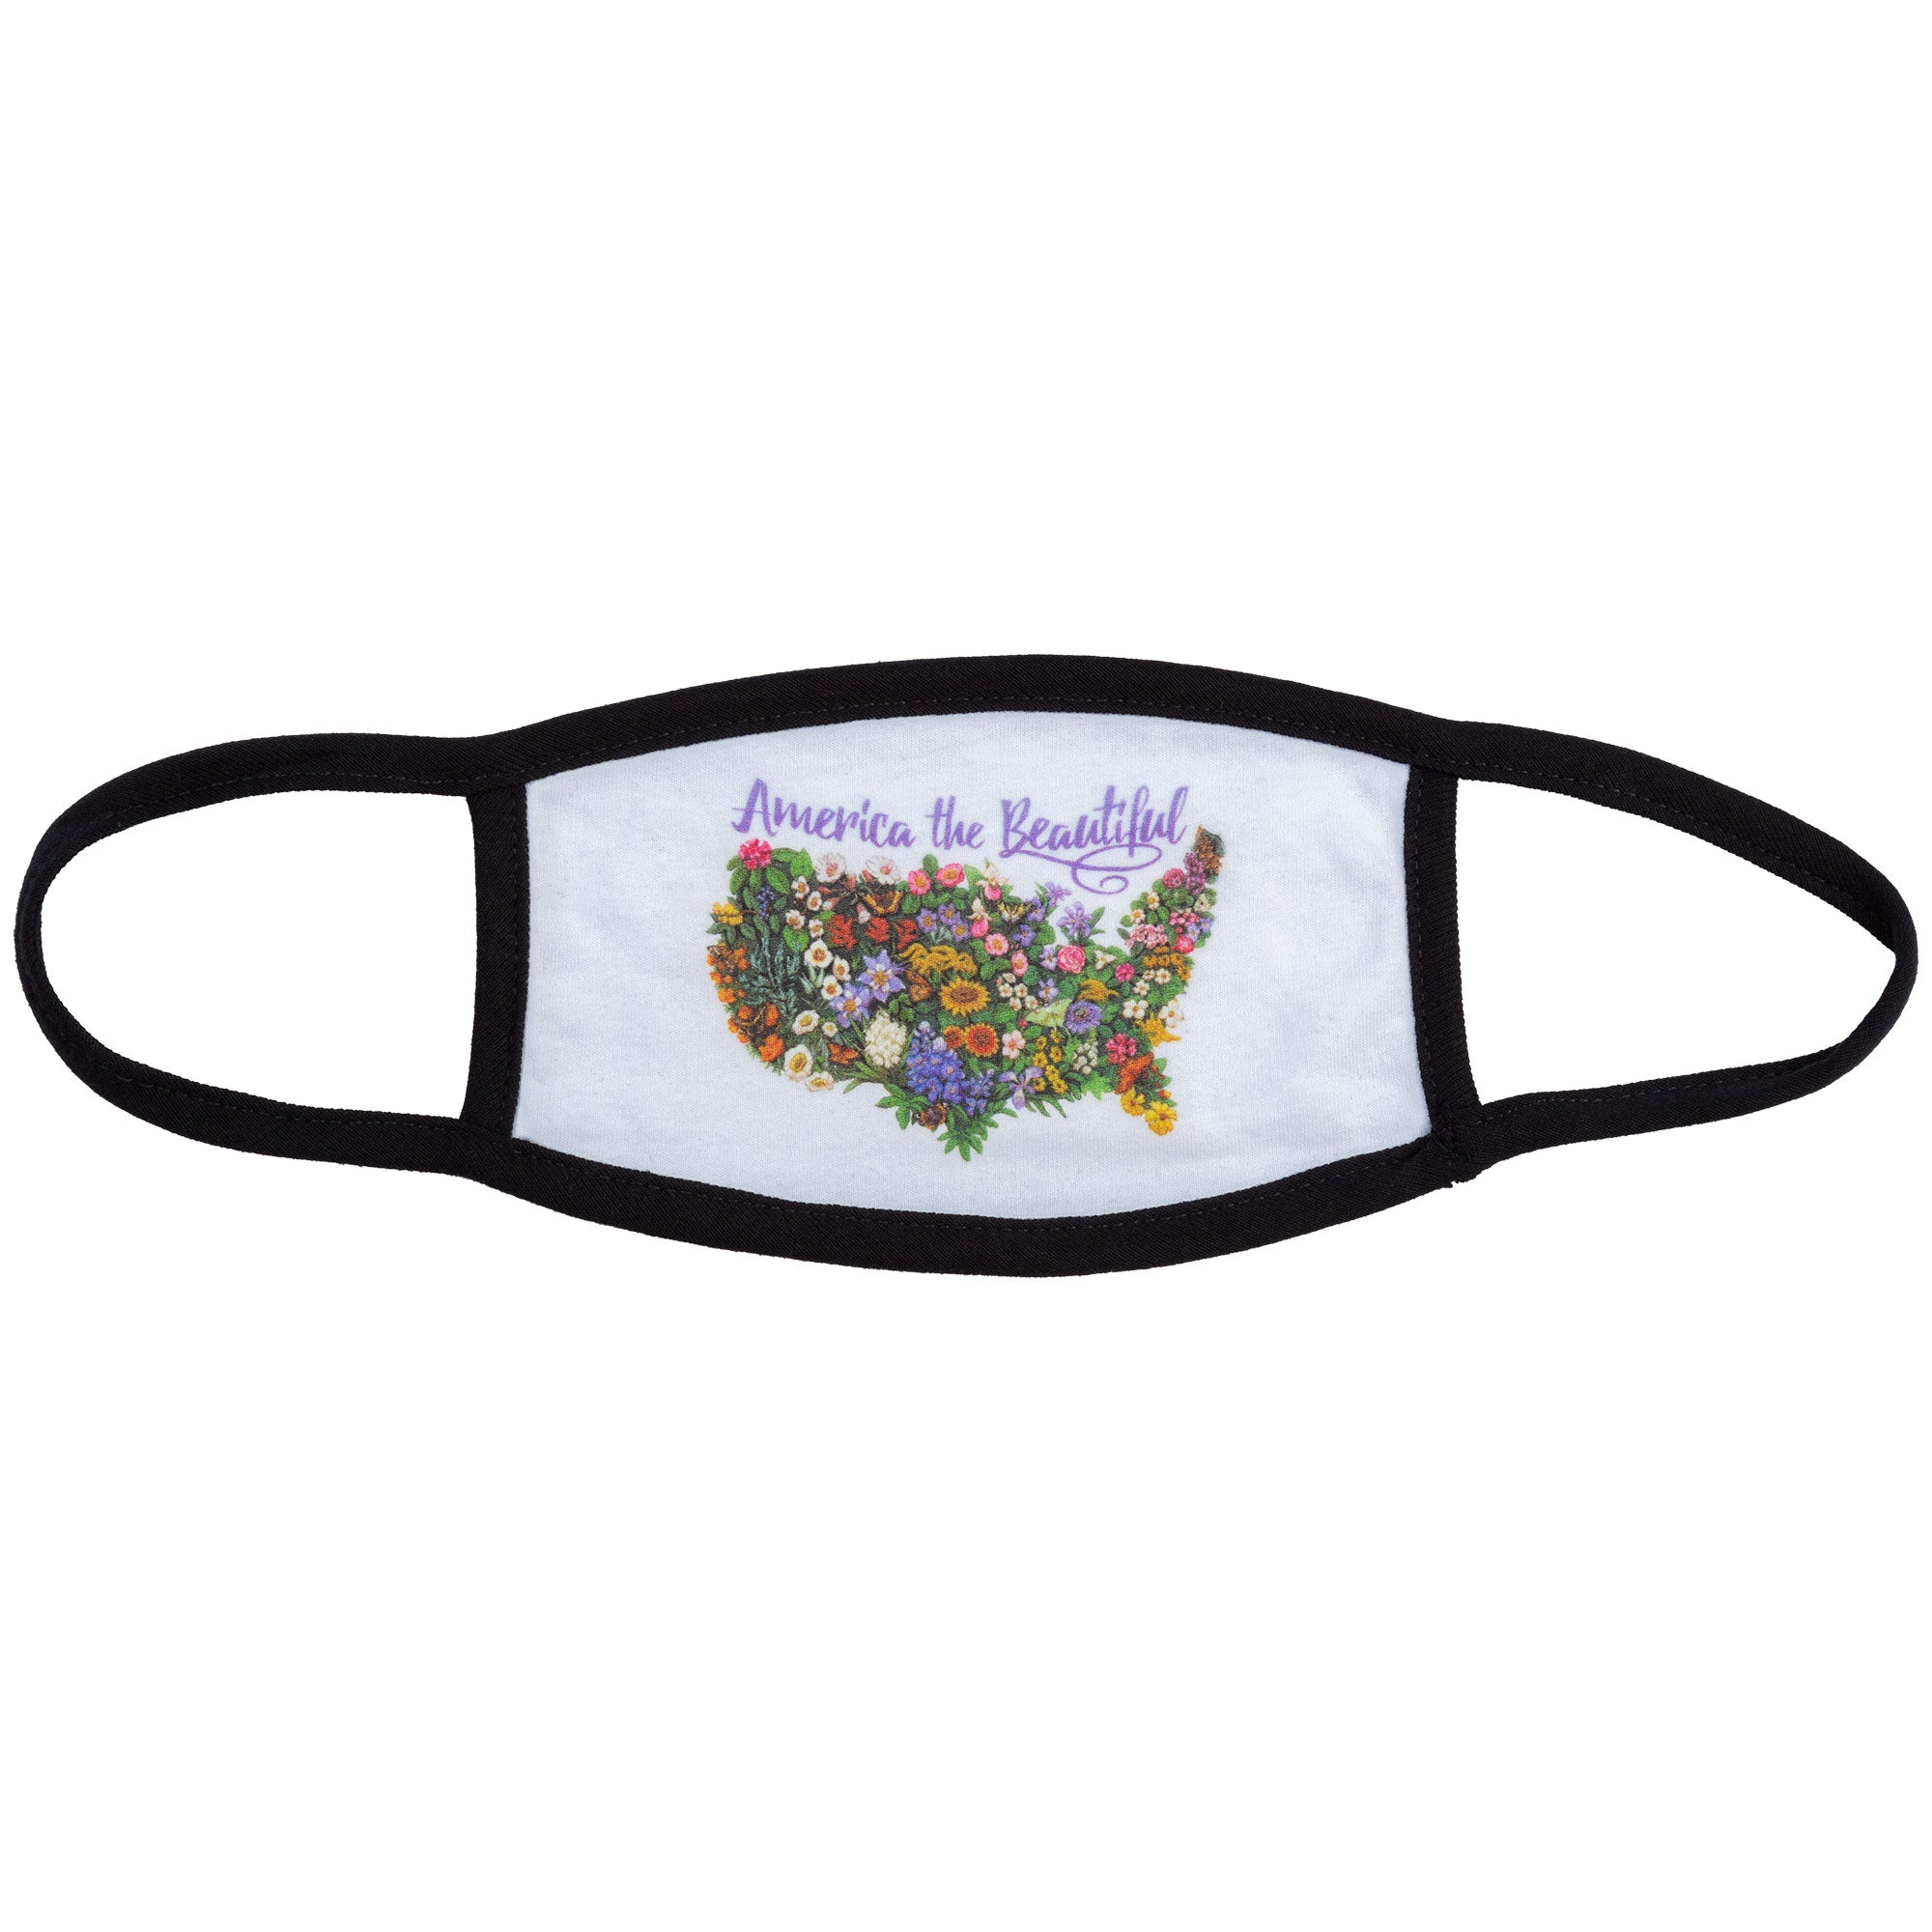 Colorful & Cute Cotton Face Mask - American The Beautiful